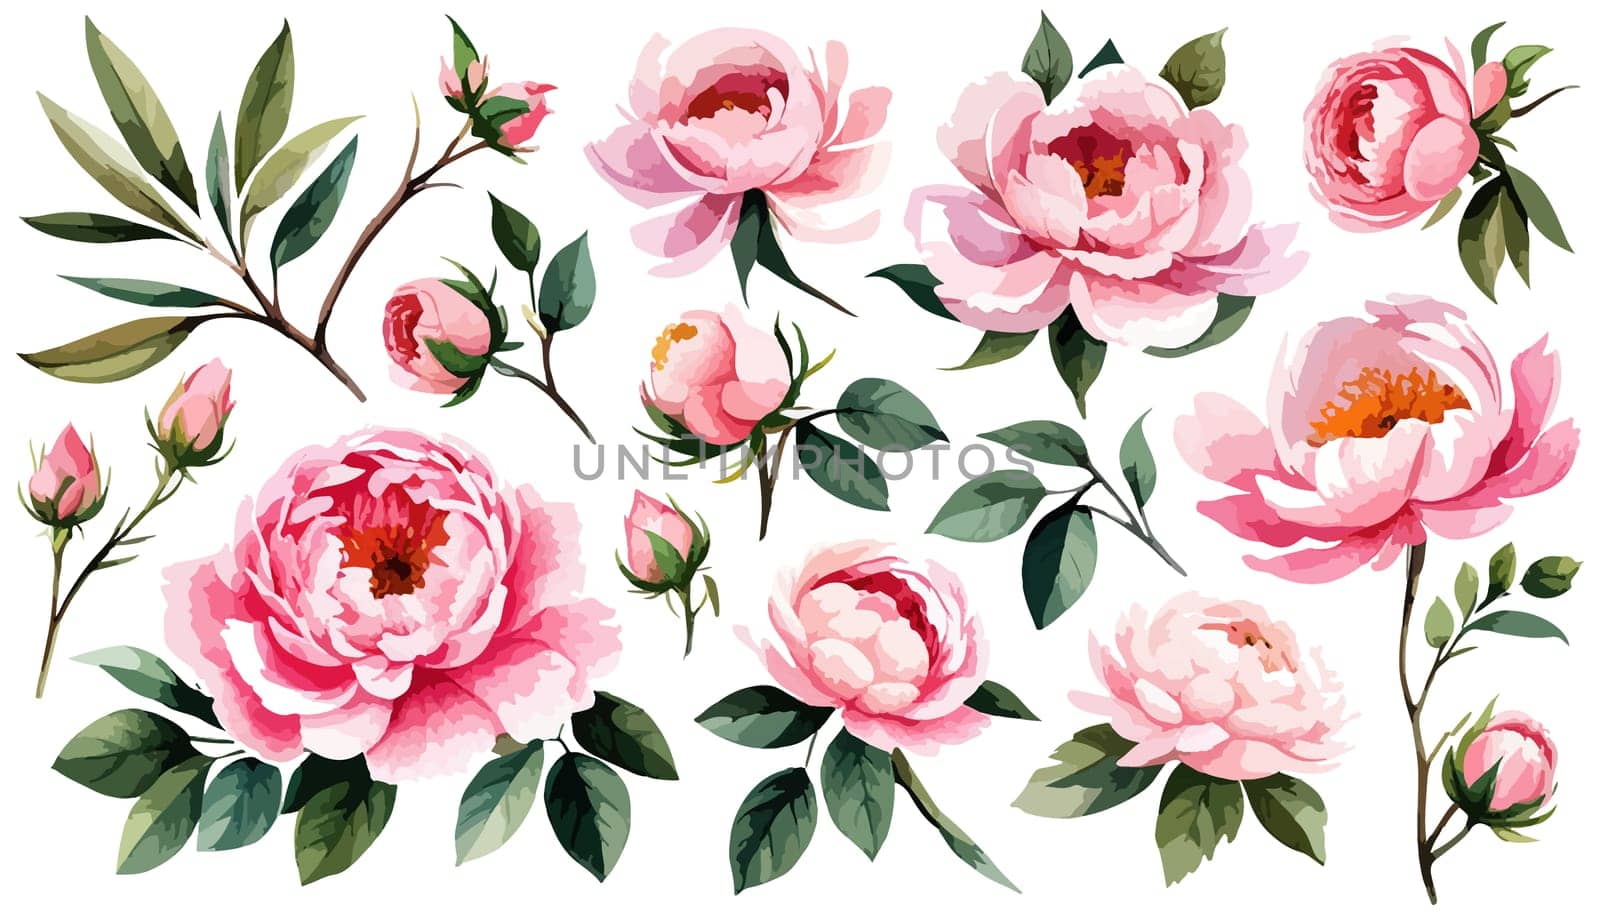 Floral illustration set bouquet pink peonies, wreath, frame green leaves, pink peach blush white flowers branches. Wedding invitations, greetings, wallpapers, fashion, prints. illustration